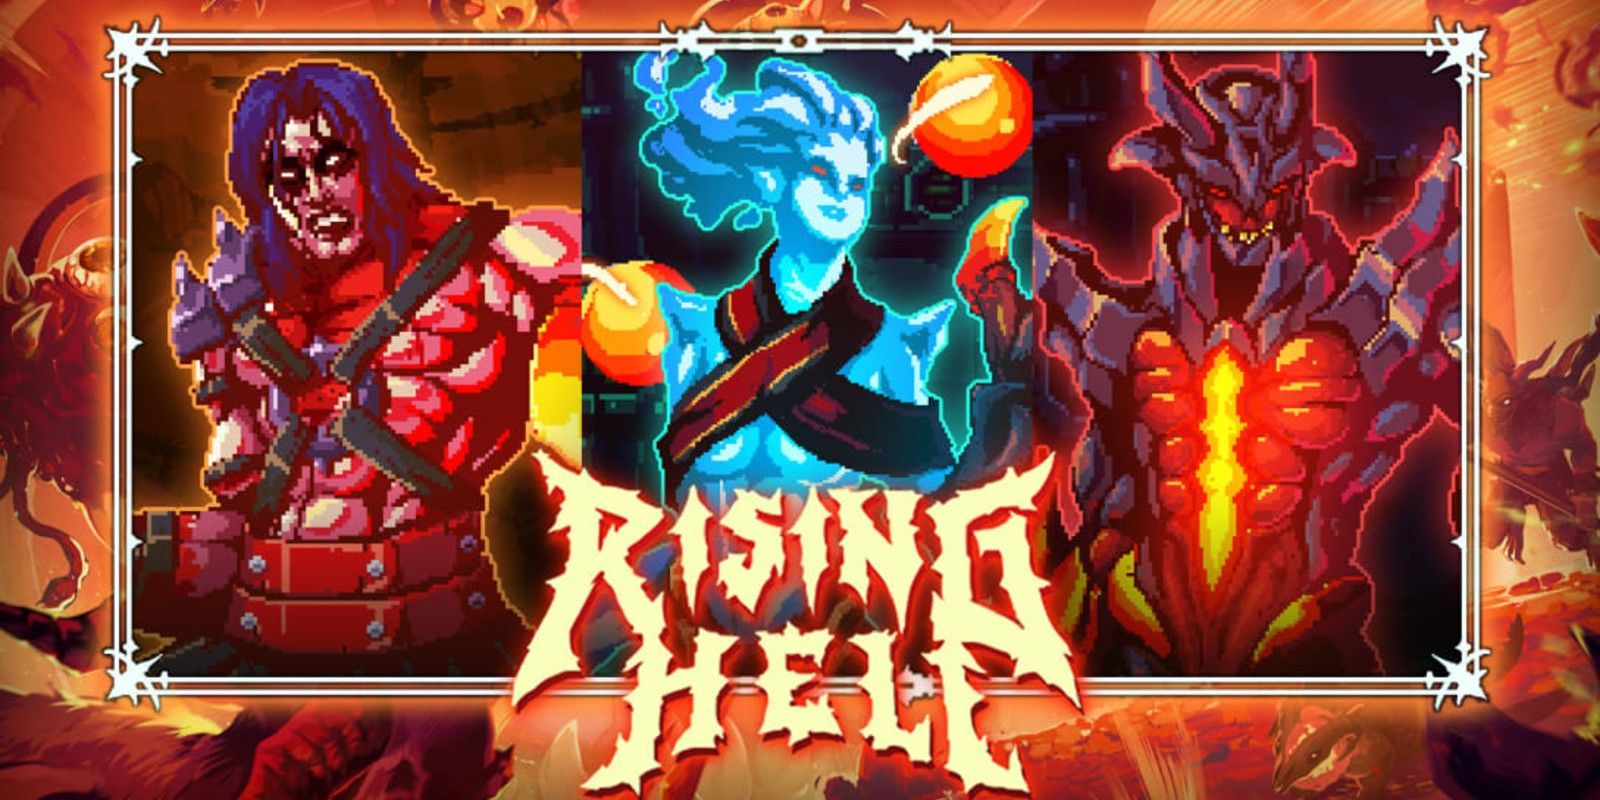 Rising Hell for ios download free